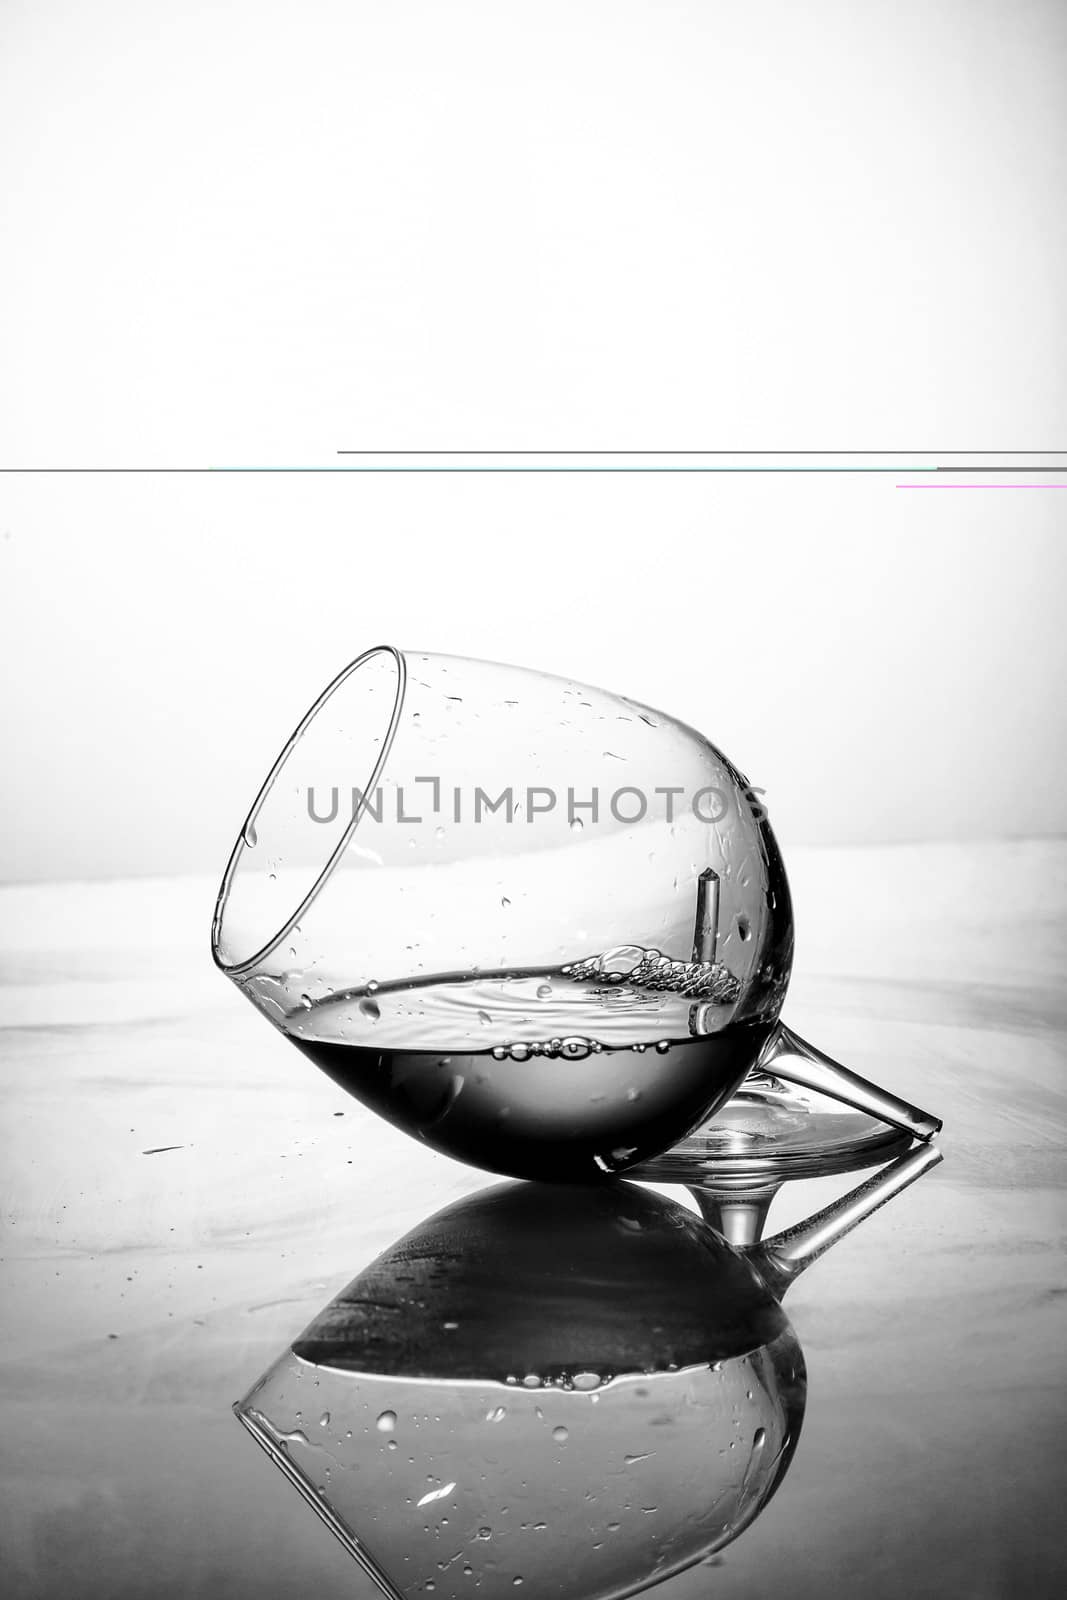 A broken glass in balck and white